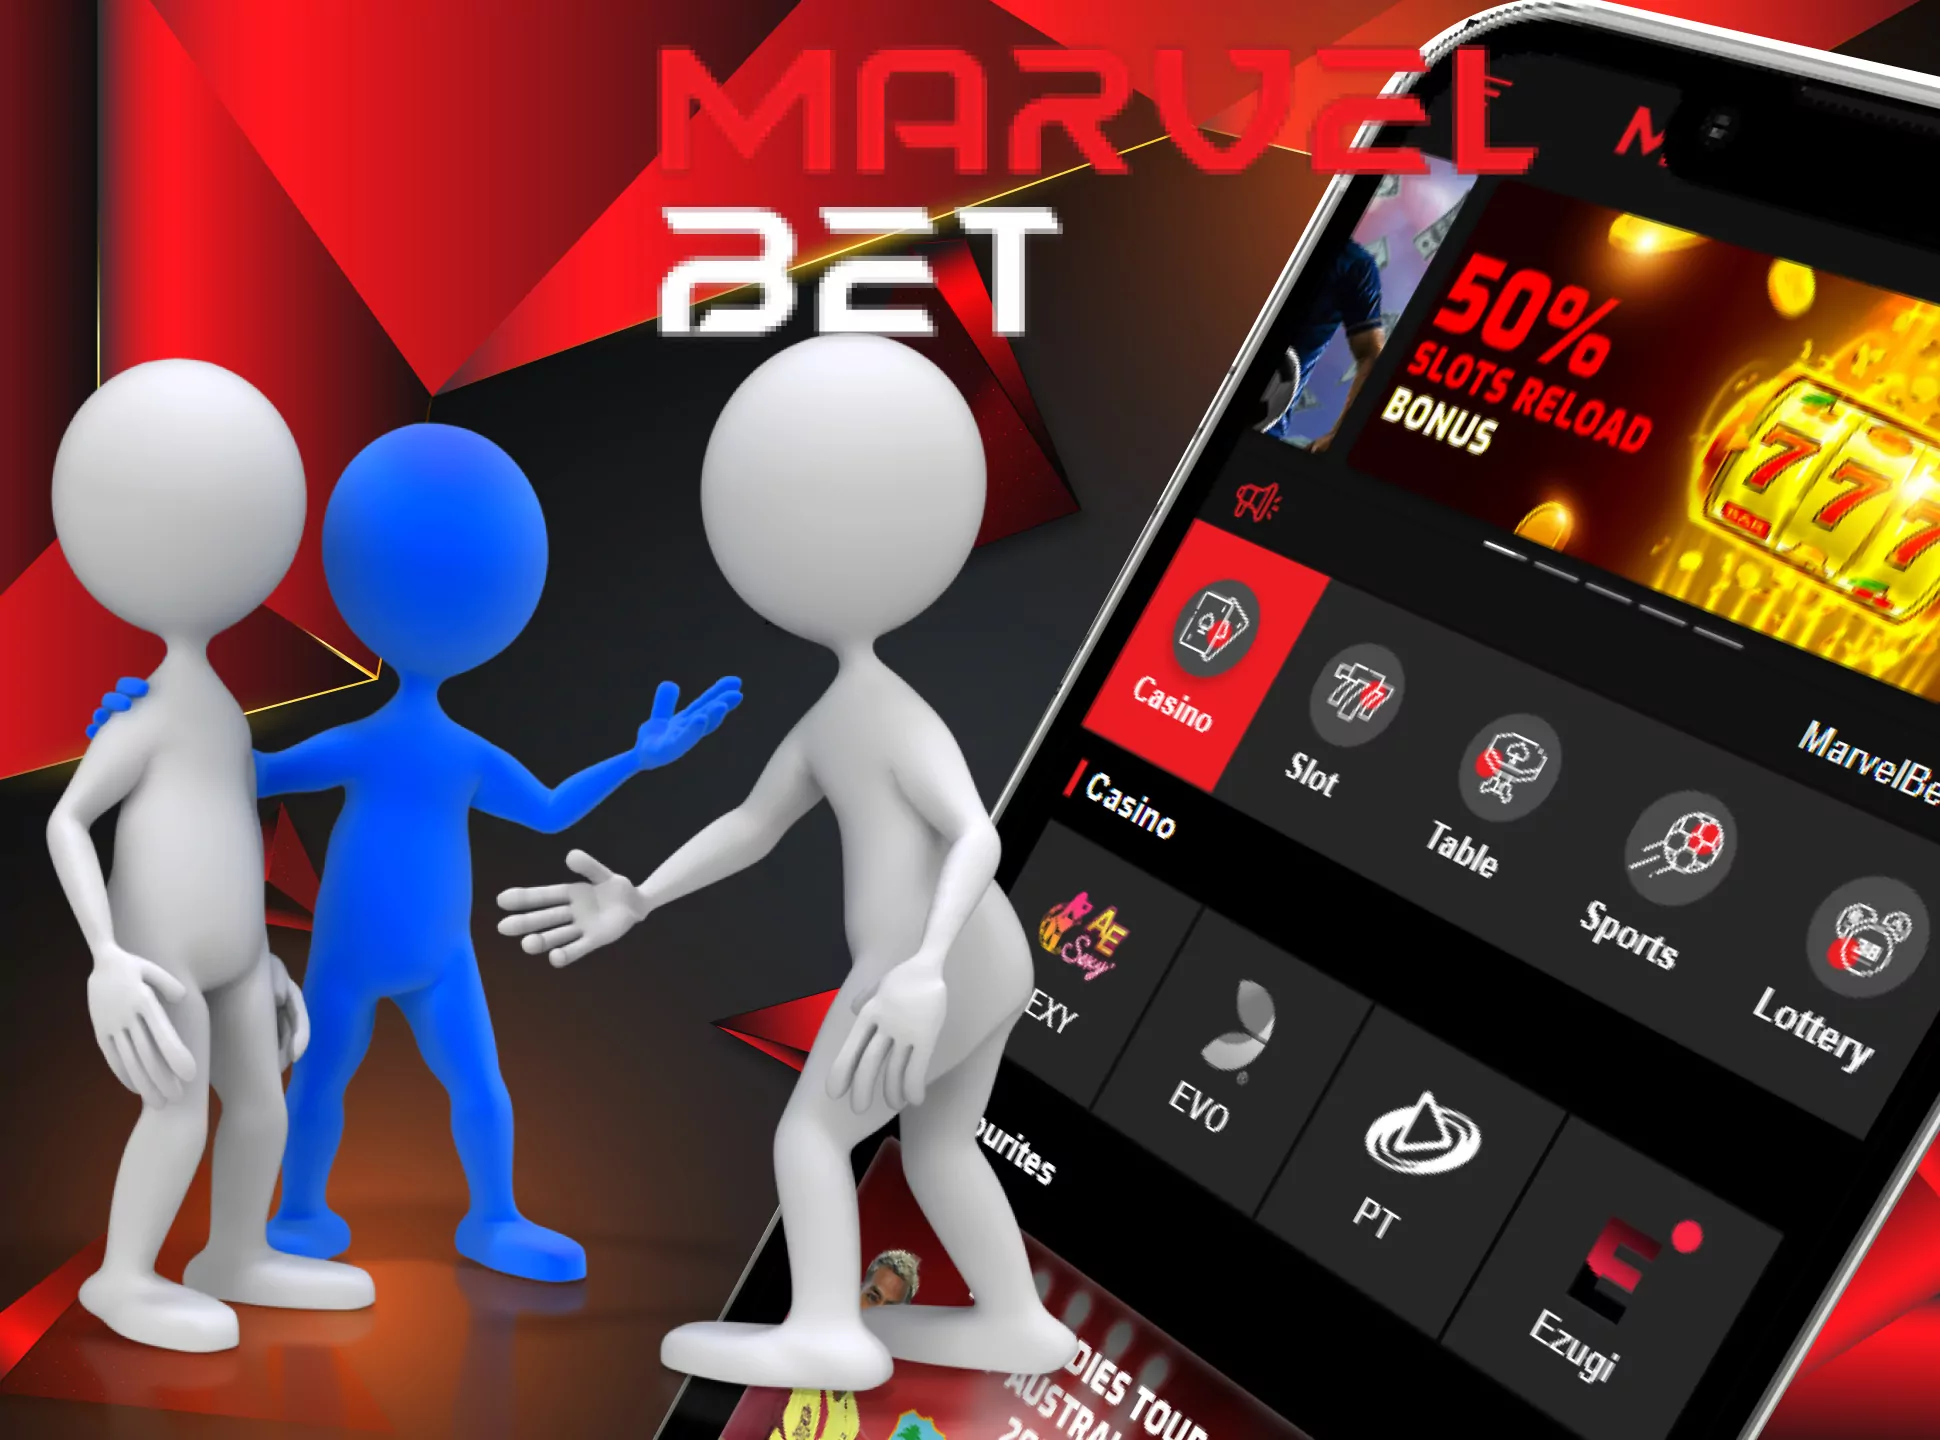 Join the Marvelbet affiliate program to get more bonuses.